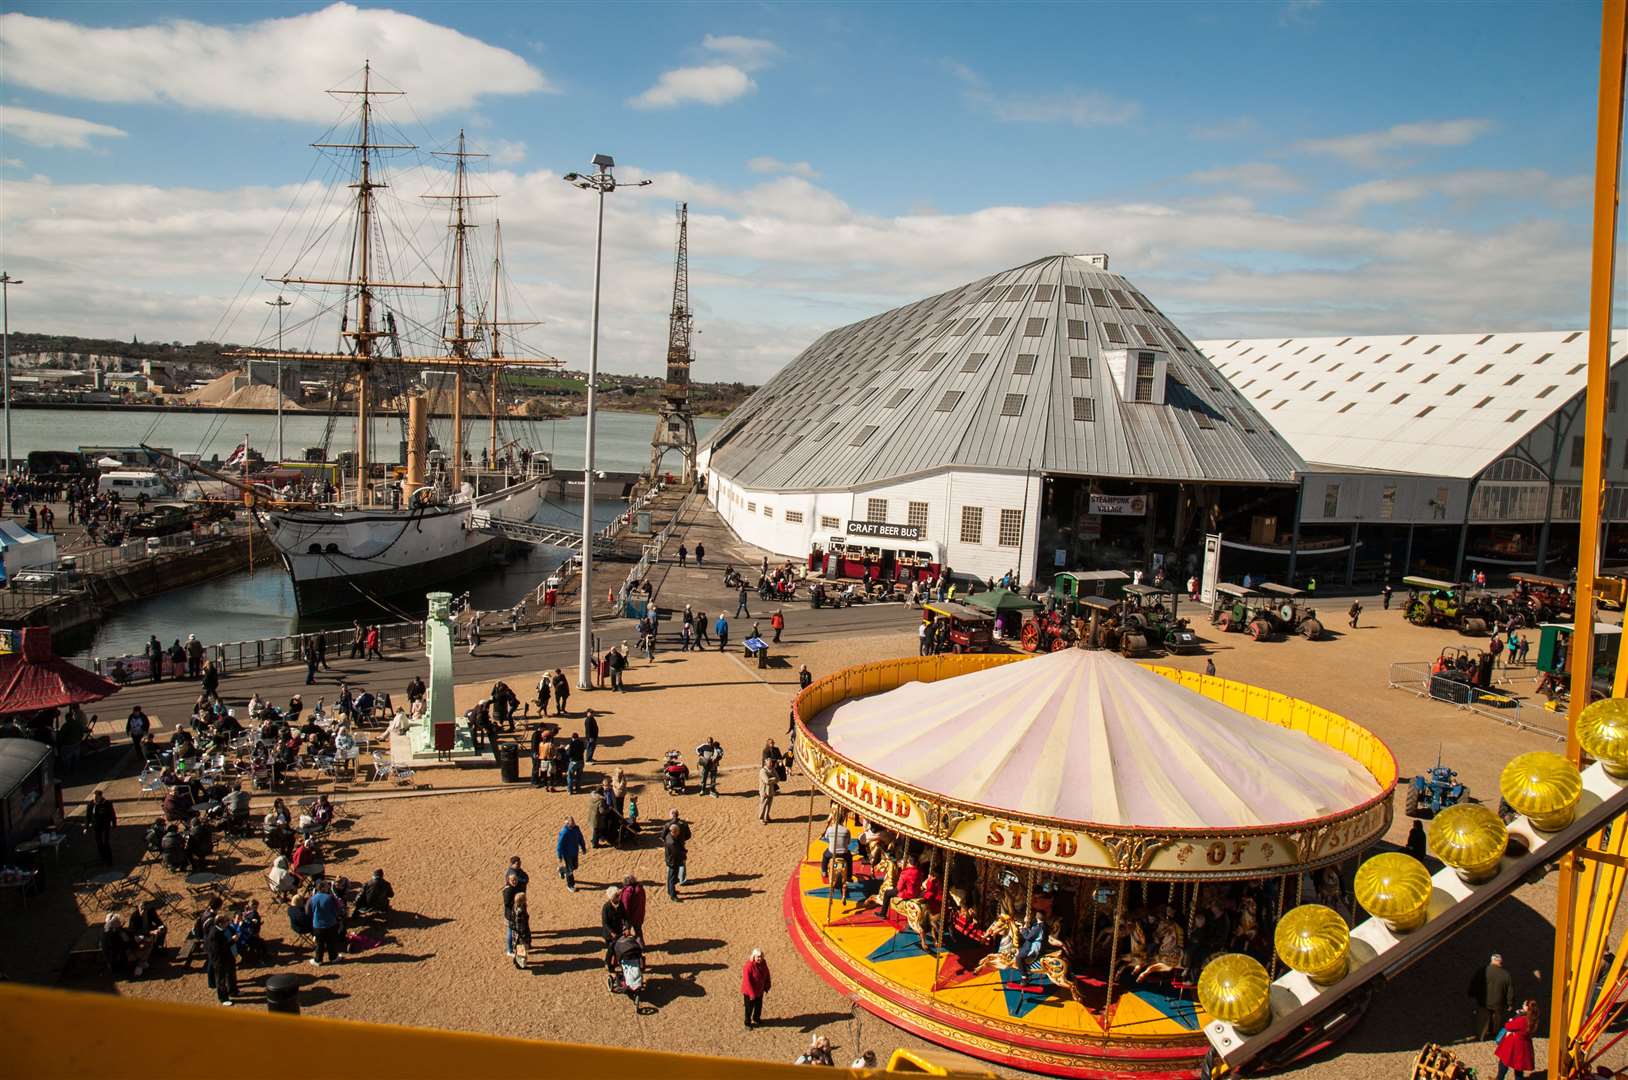 Chatham Historic Dockyard's Festival of Steam and Transport is another popular annual attraction at the site